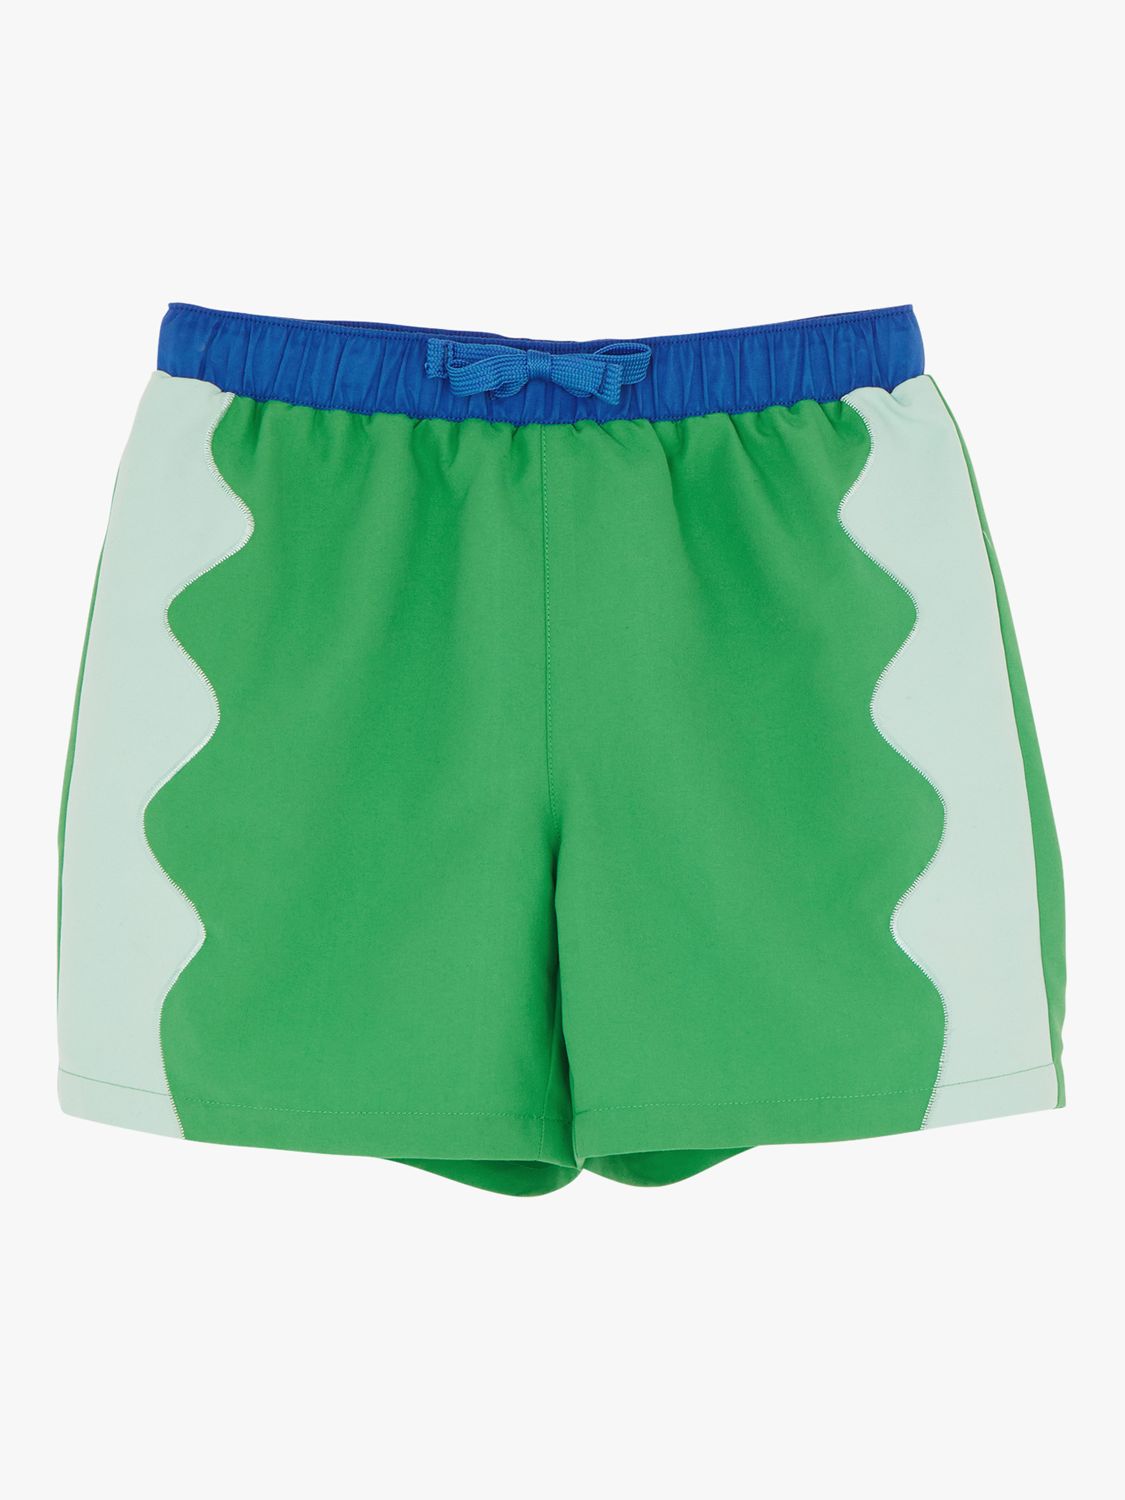 Angels by Accessorize Kids' Wave Swim Shorts, Green/Multi, 3-4 years